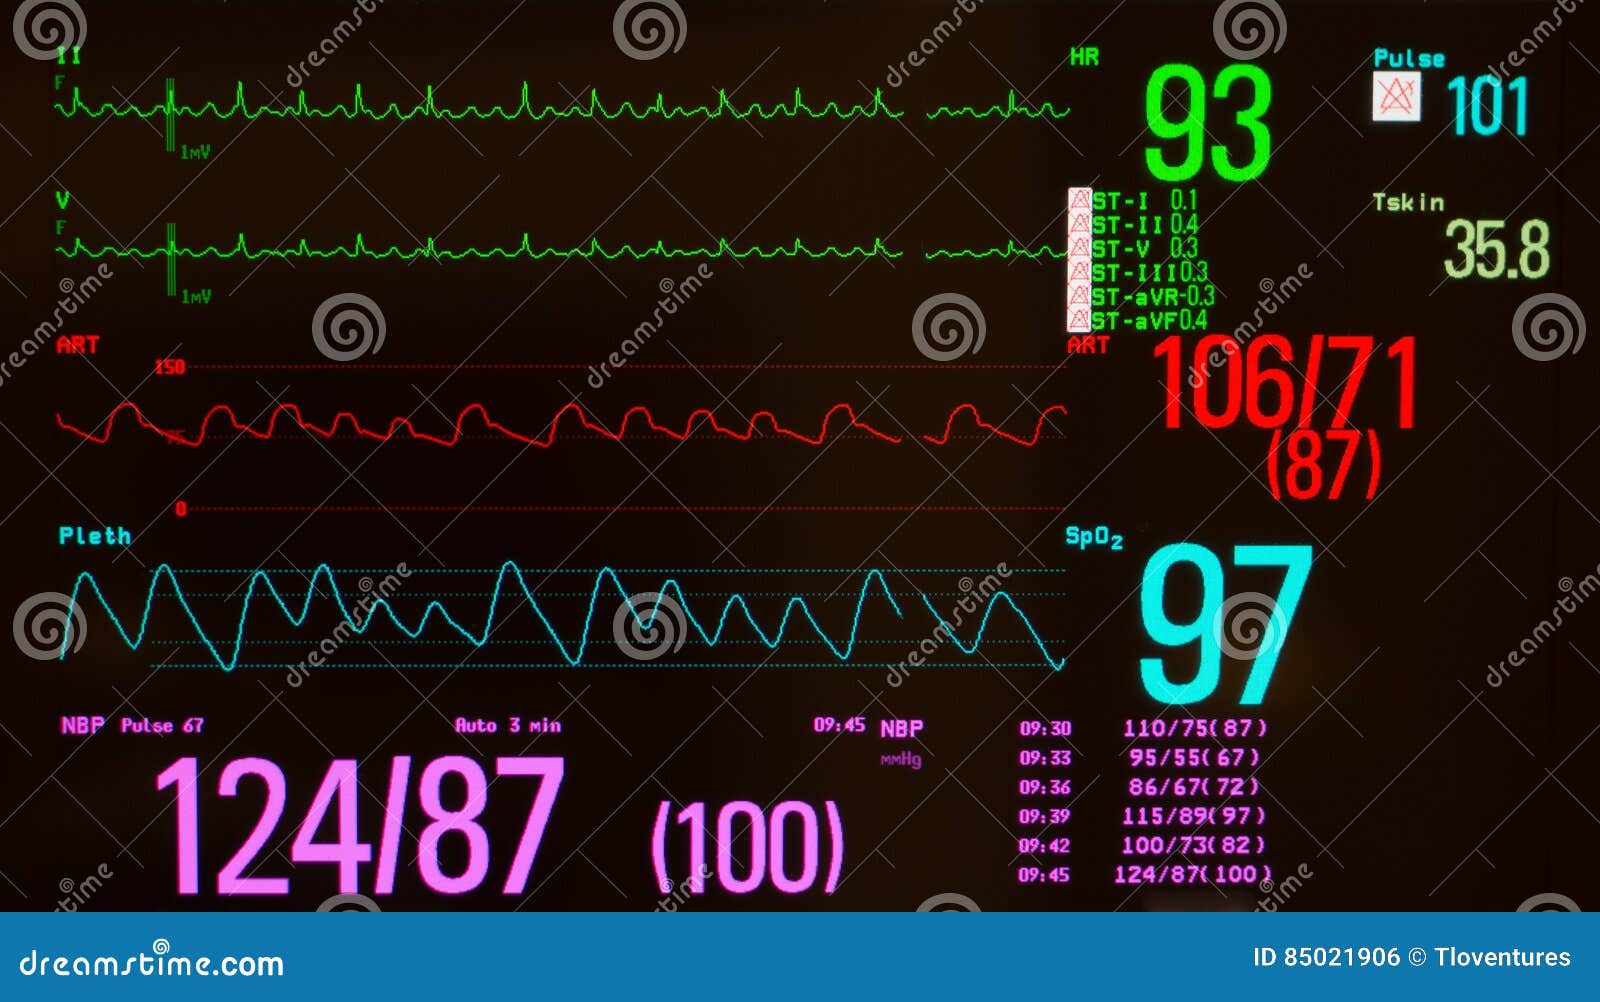 atrial flutter and vital signs